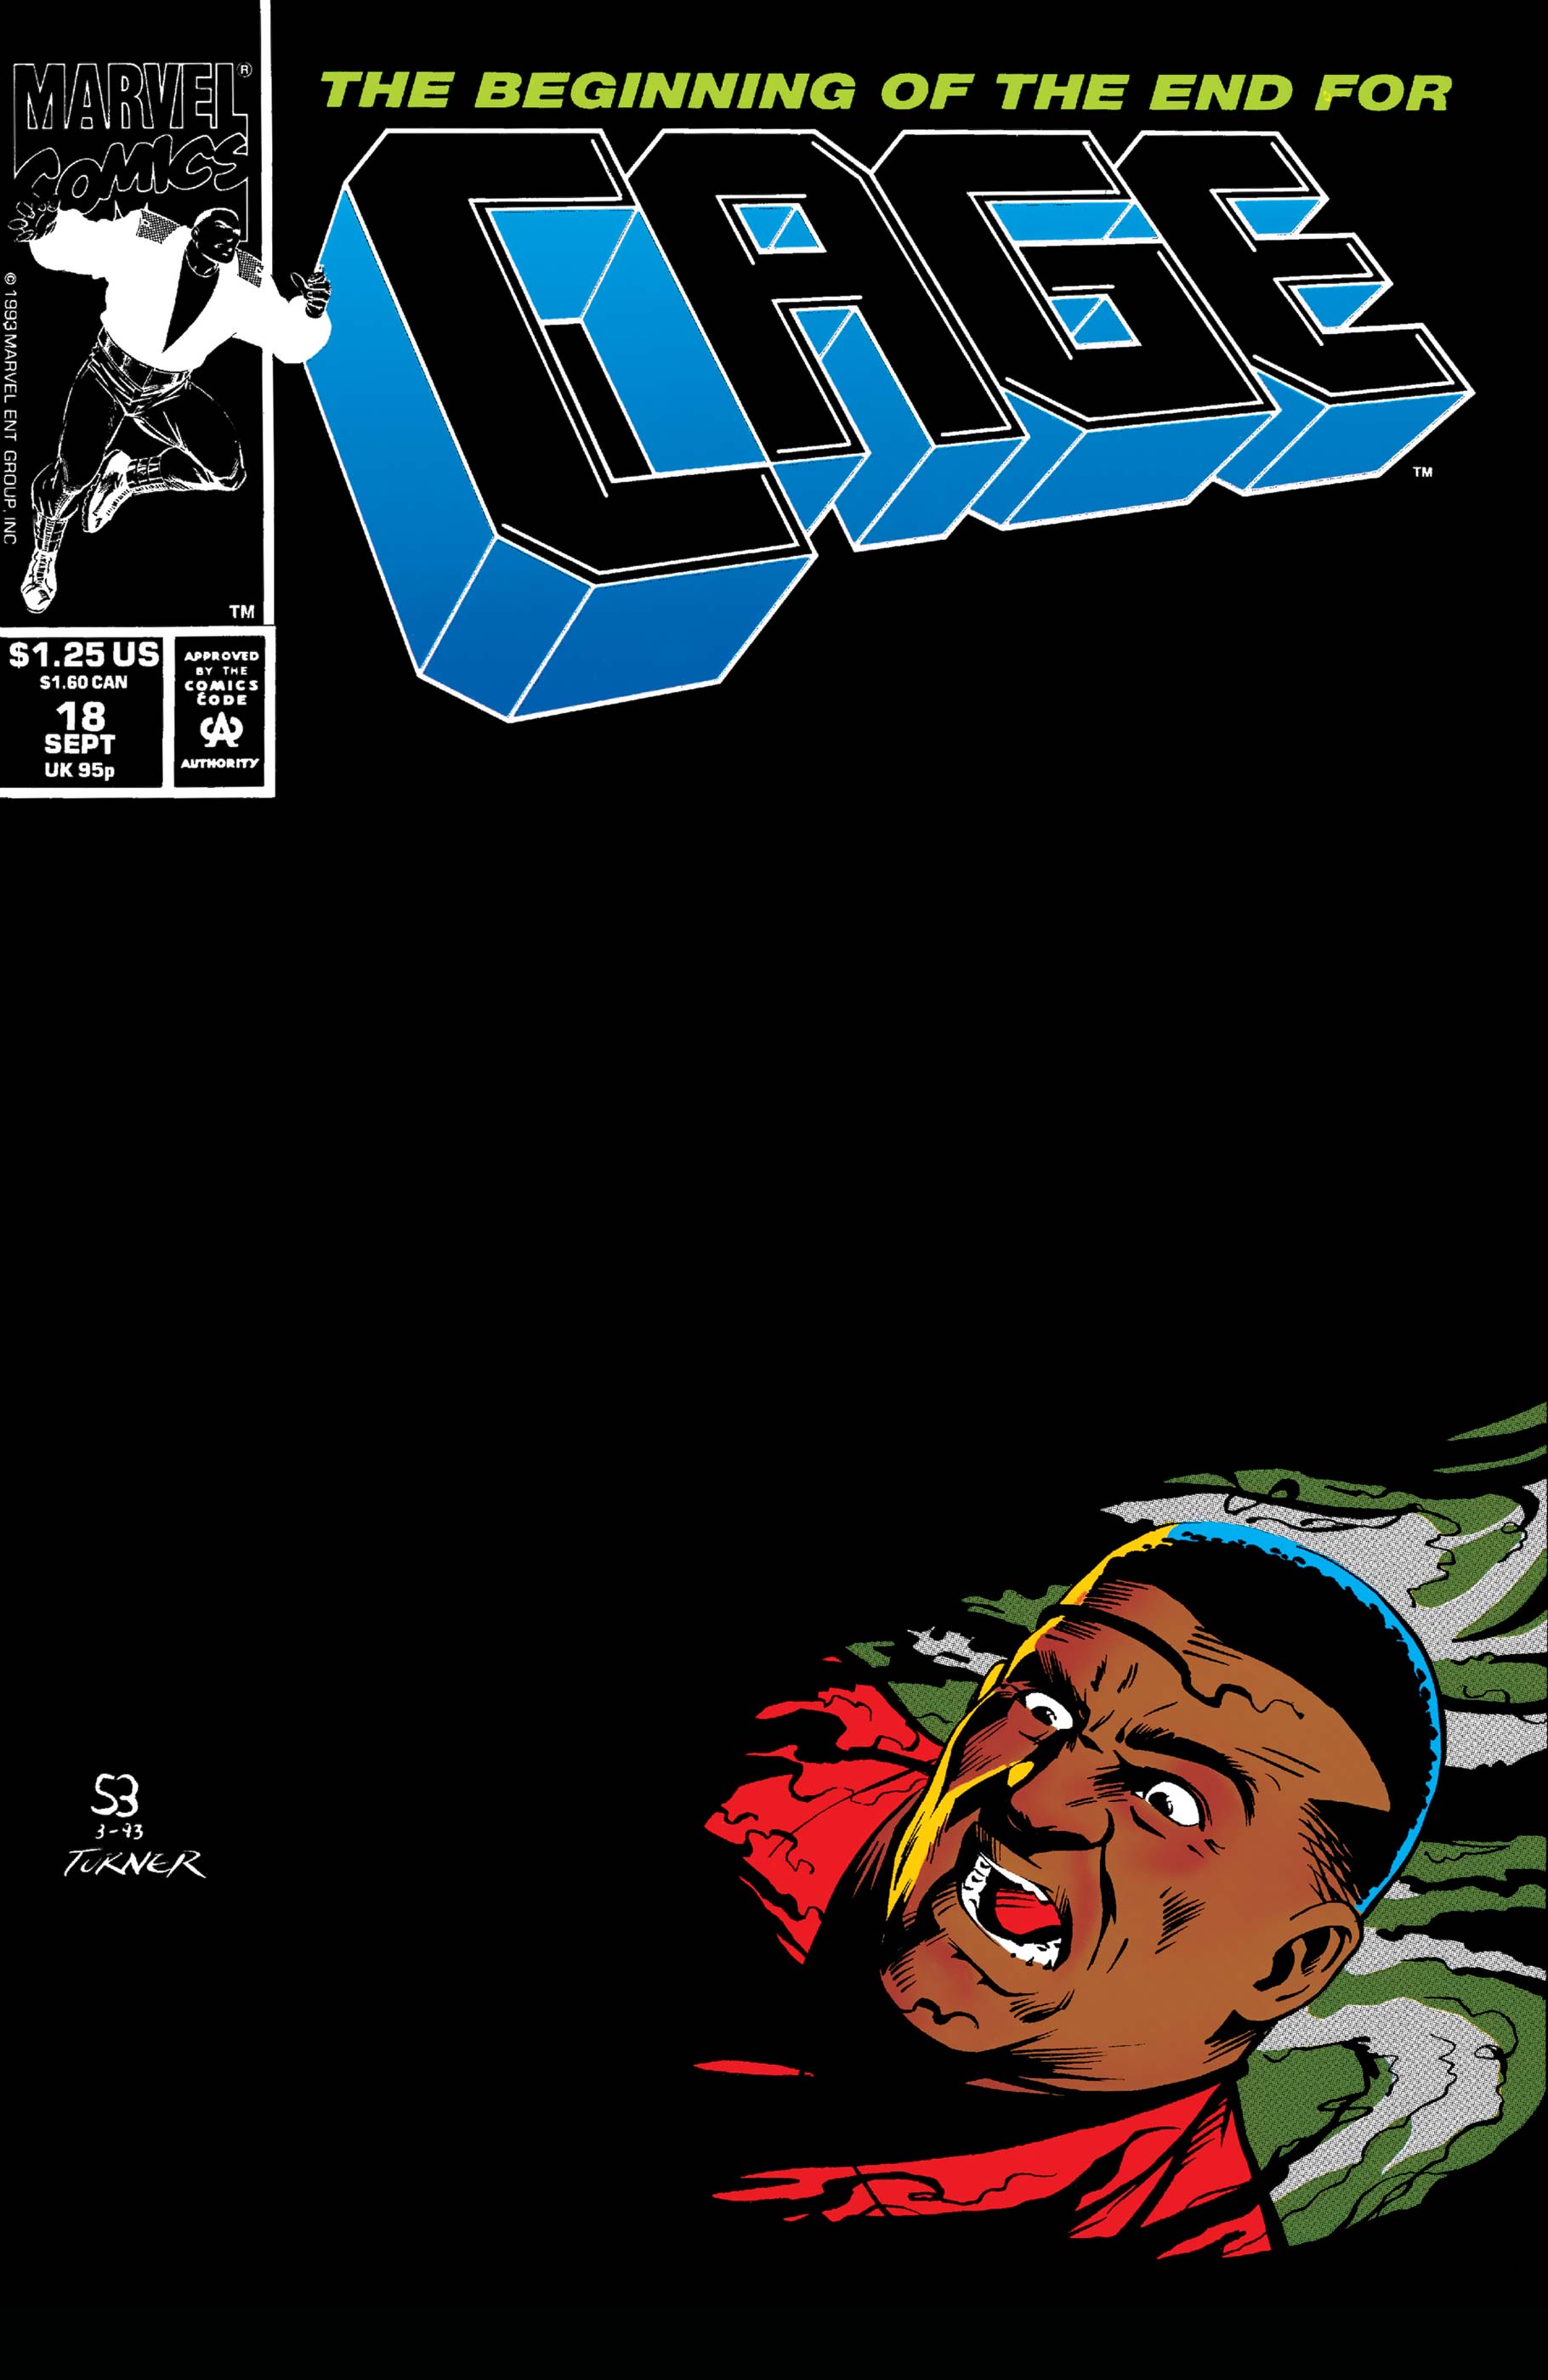 Cage (1992) #18